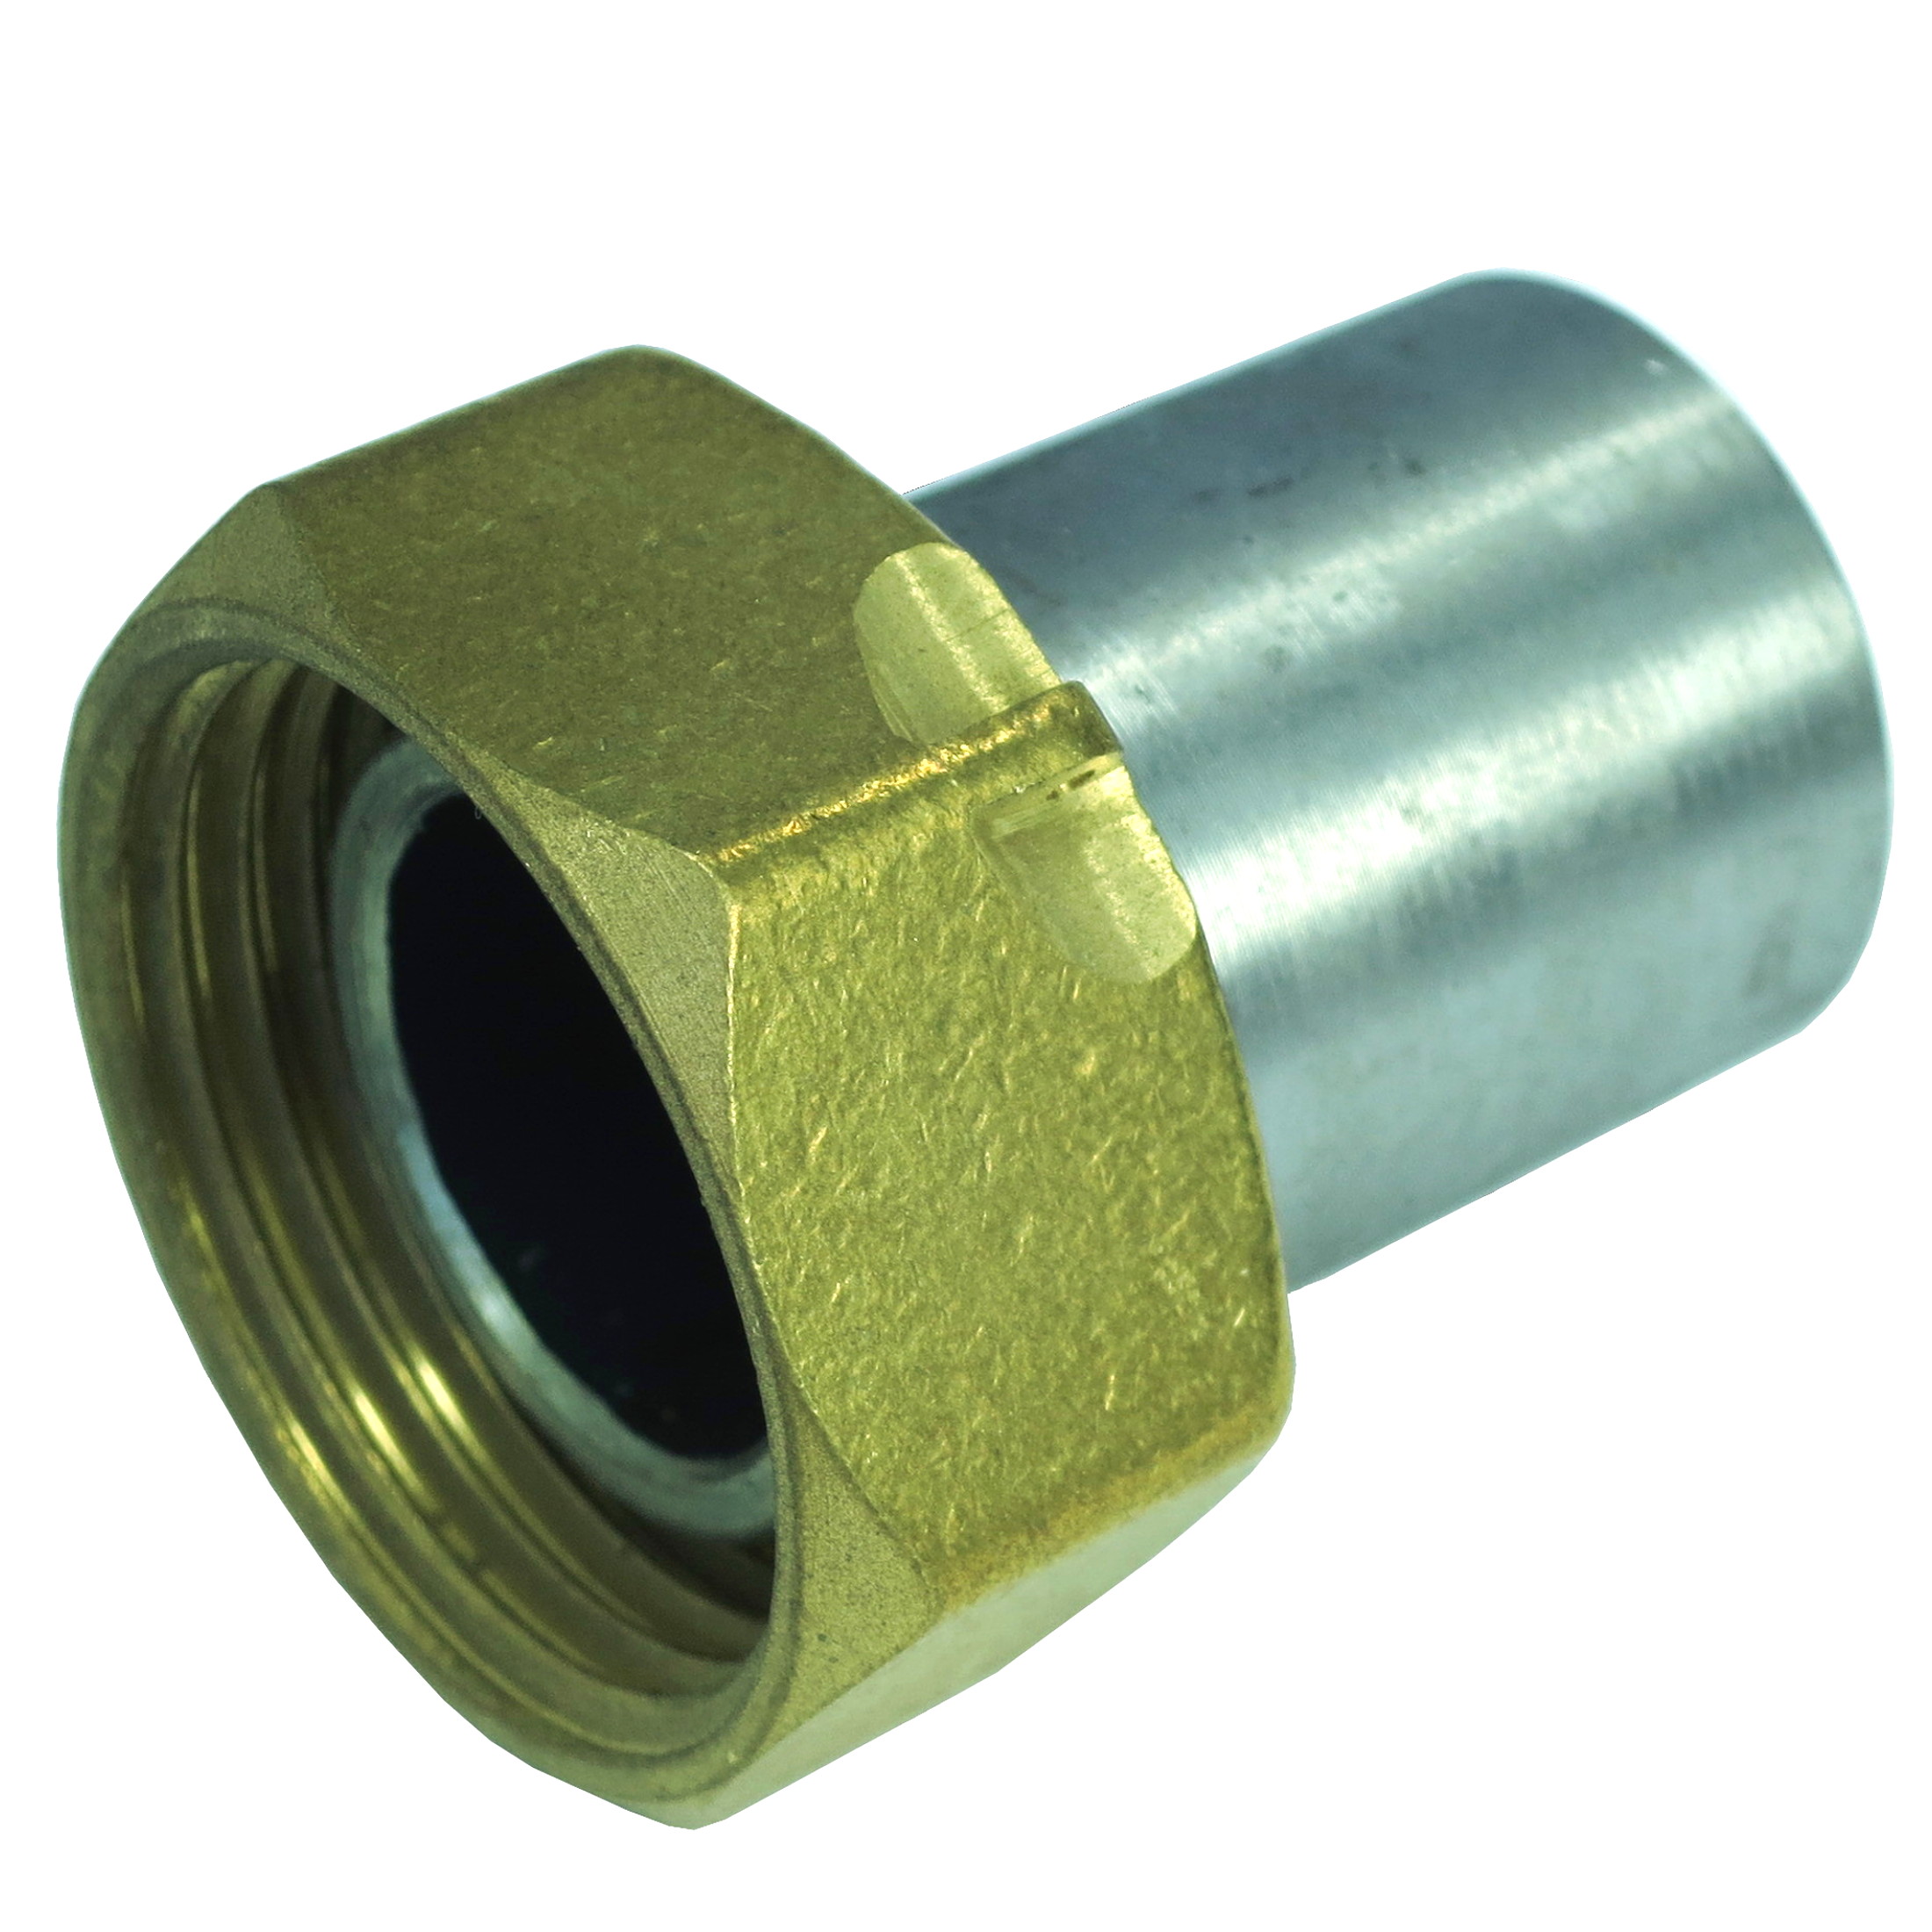 BRASS CONNECTOR FOR PLUG GAS VALVE WITH IRON TAIL AND NUT WITH LOCKING HOLE